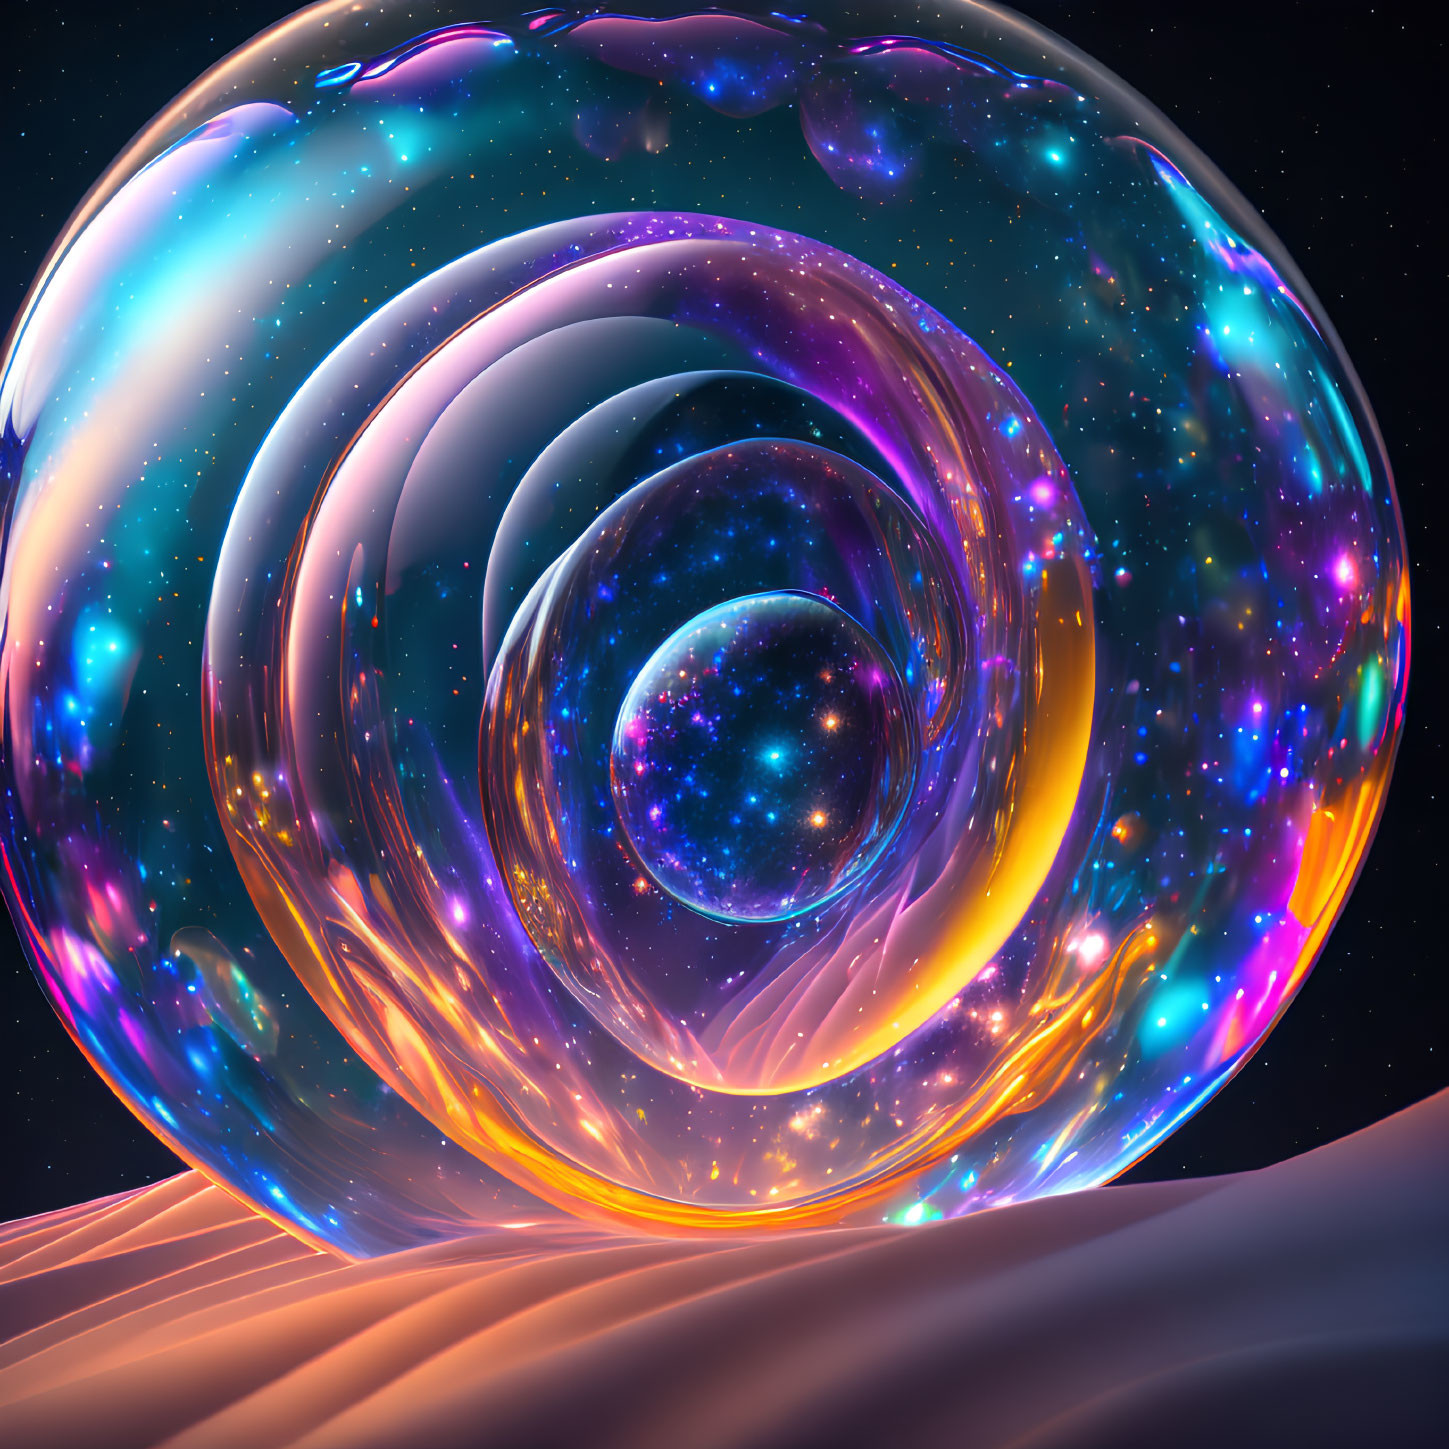 Colorful digital art: translucent cosmic bubbles and swirling vortex in starry space.